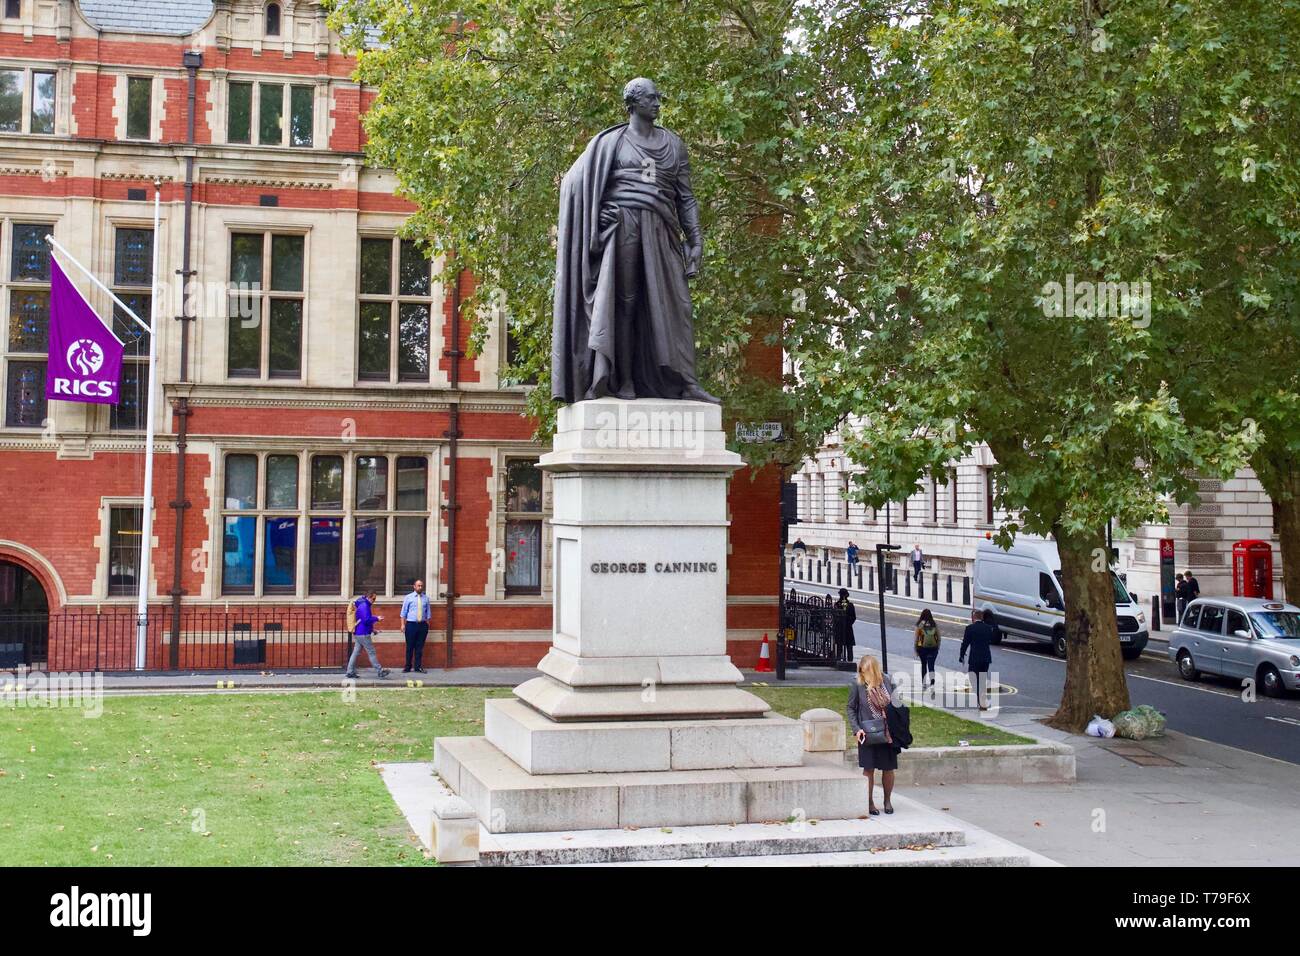 George Canning statue in front of RICS, Parliament Square, London, England. Stock Photo